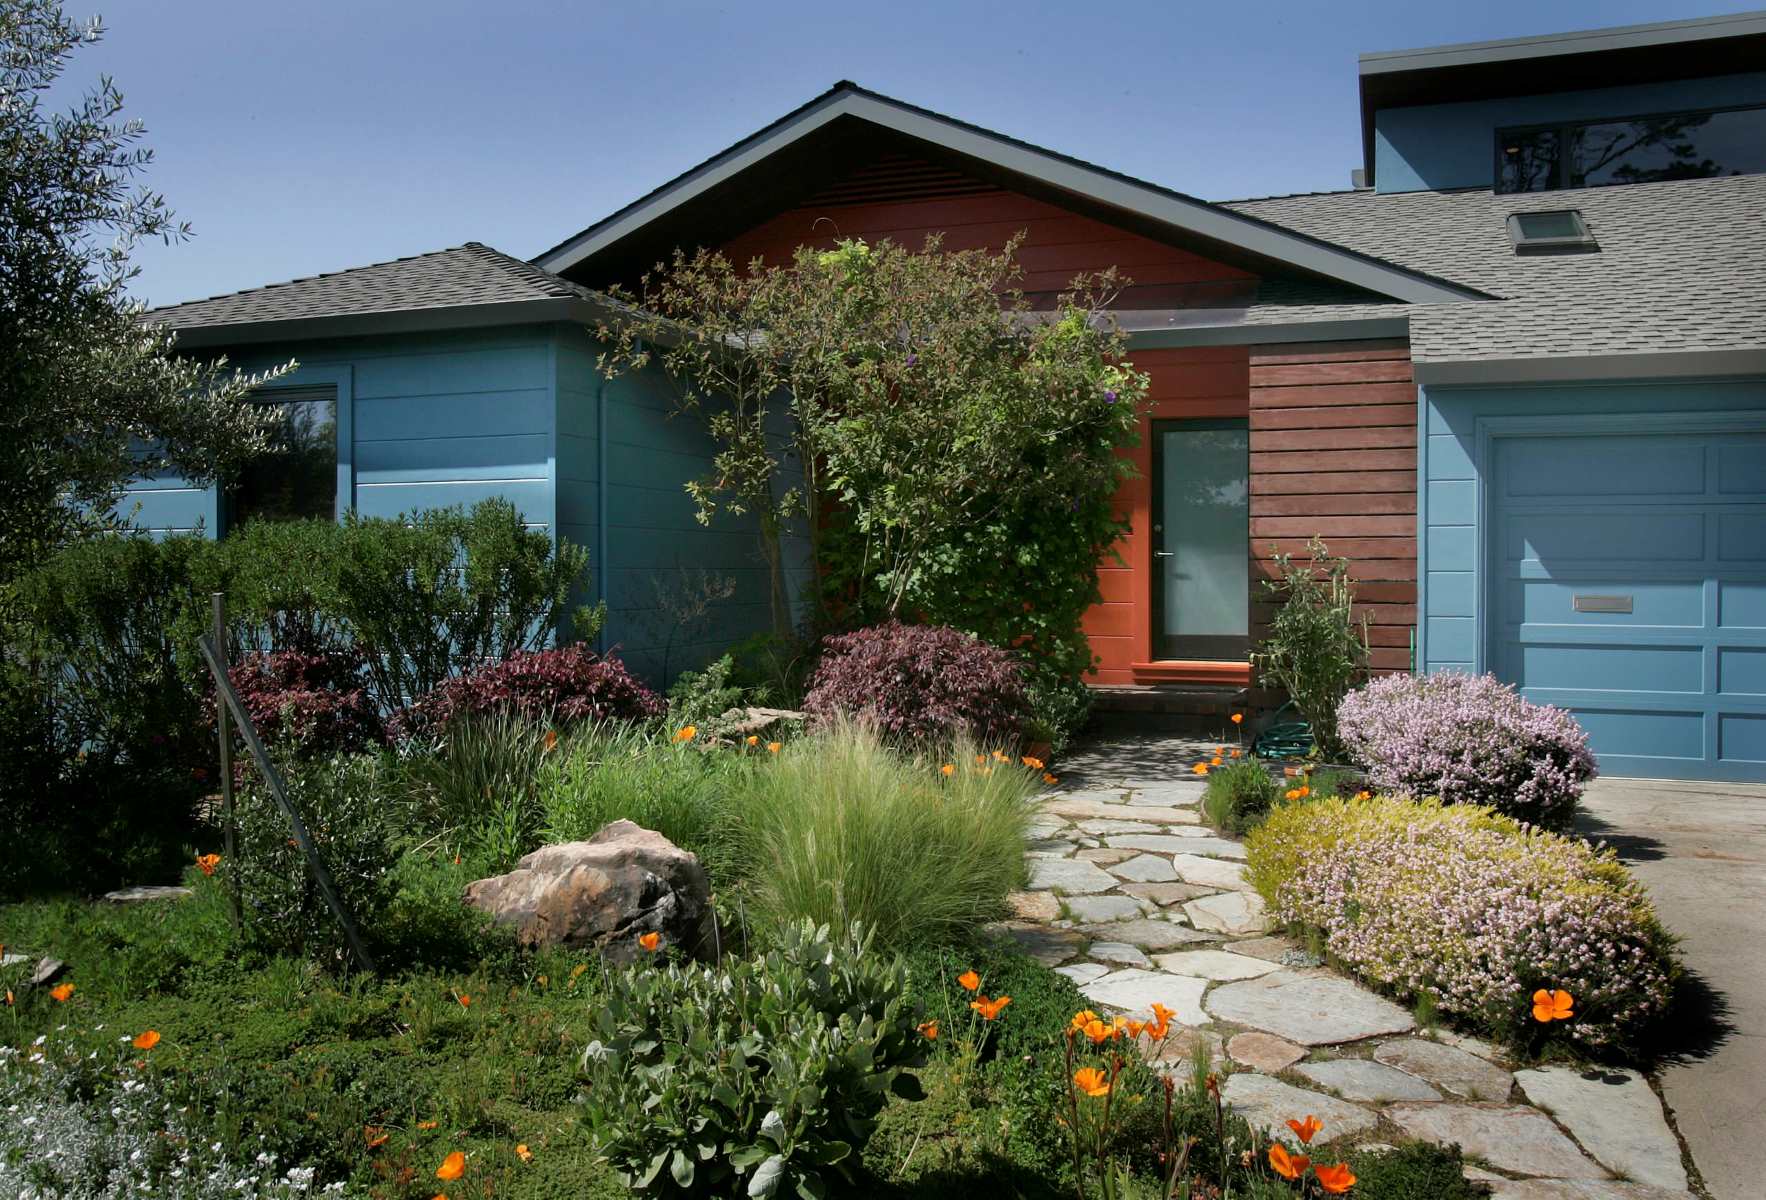 How To Design A Simple Ranch-Style Front Yard Landscape